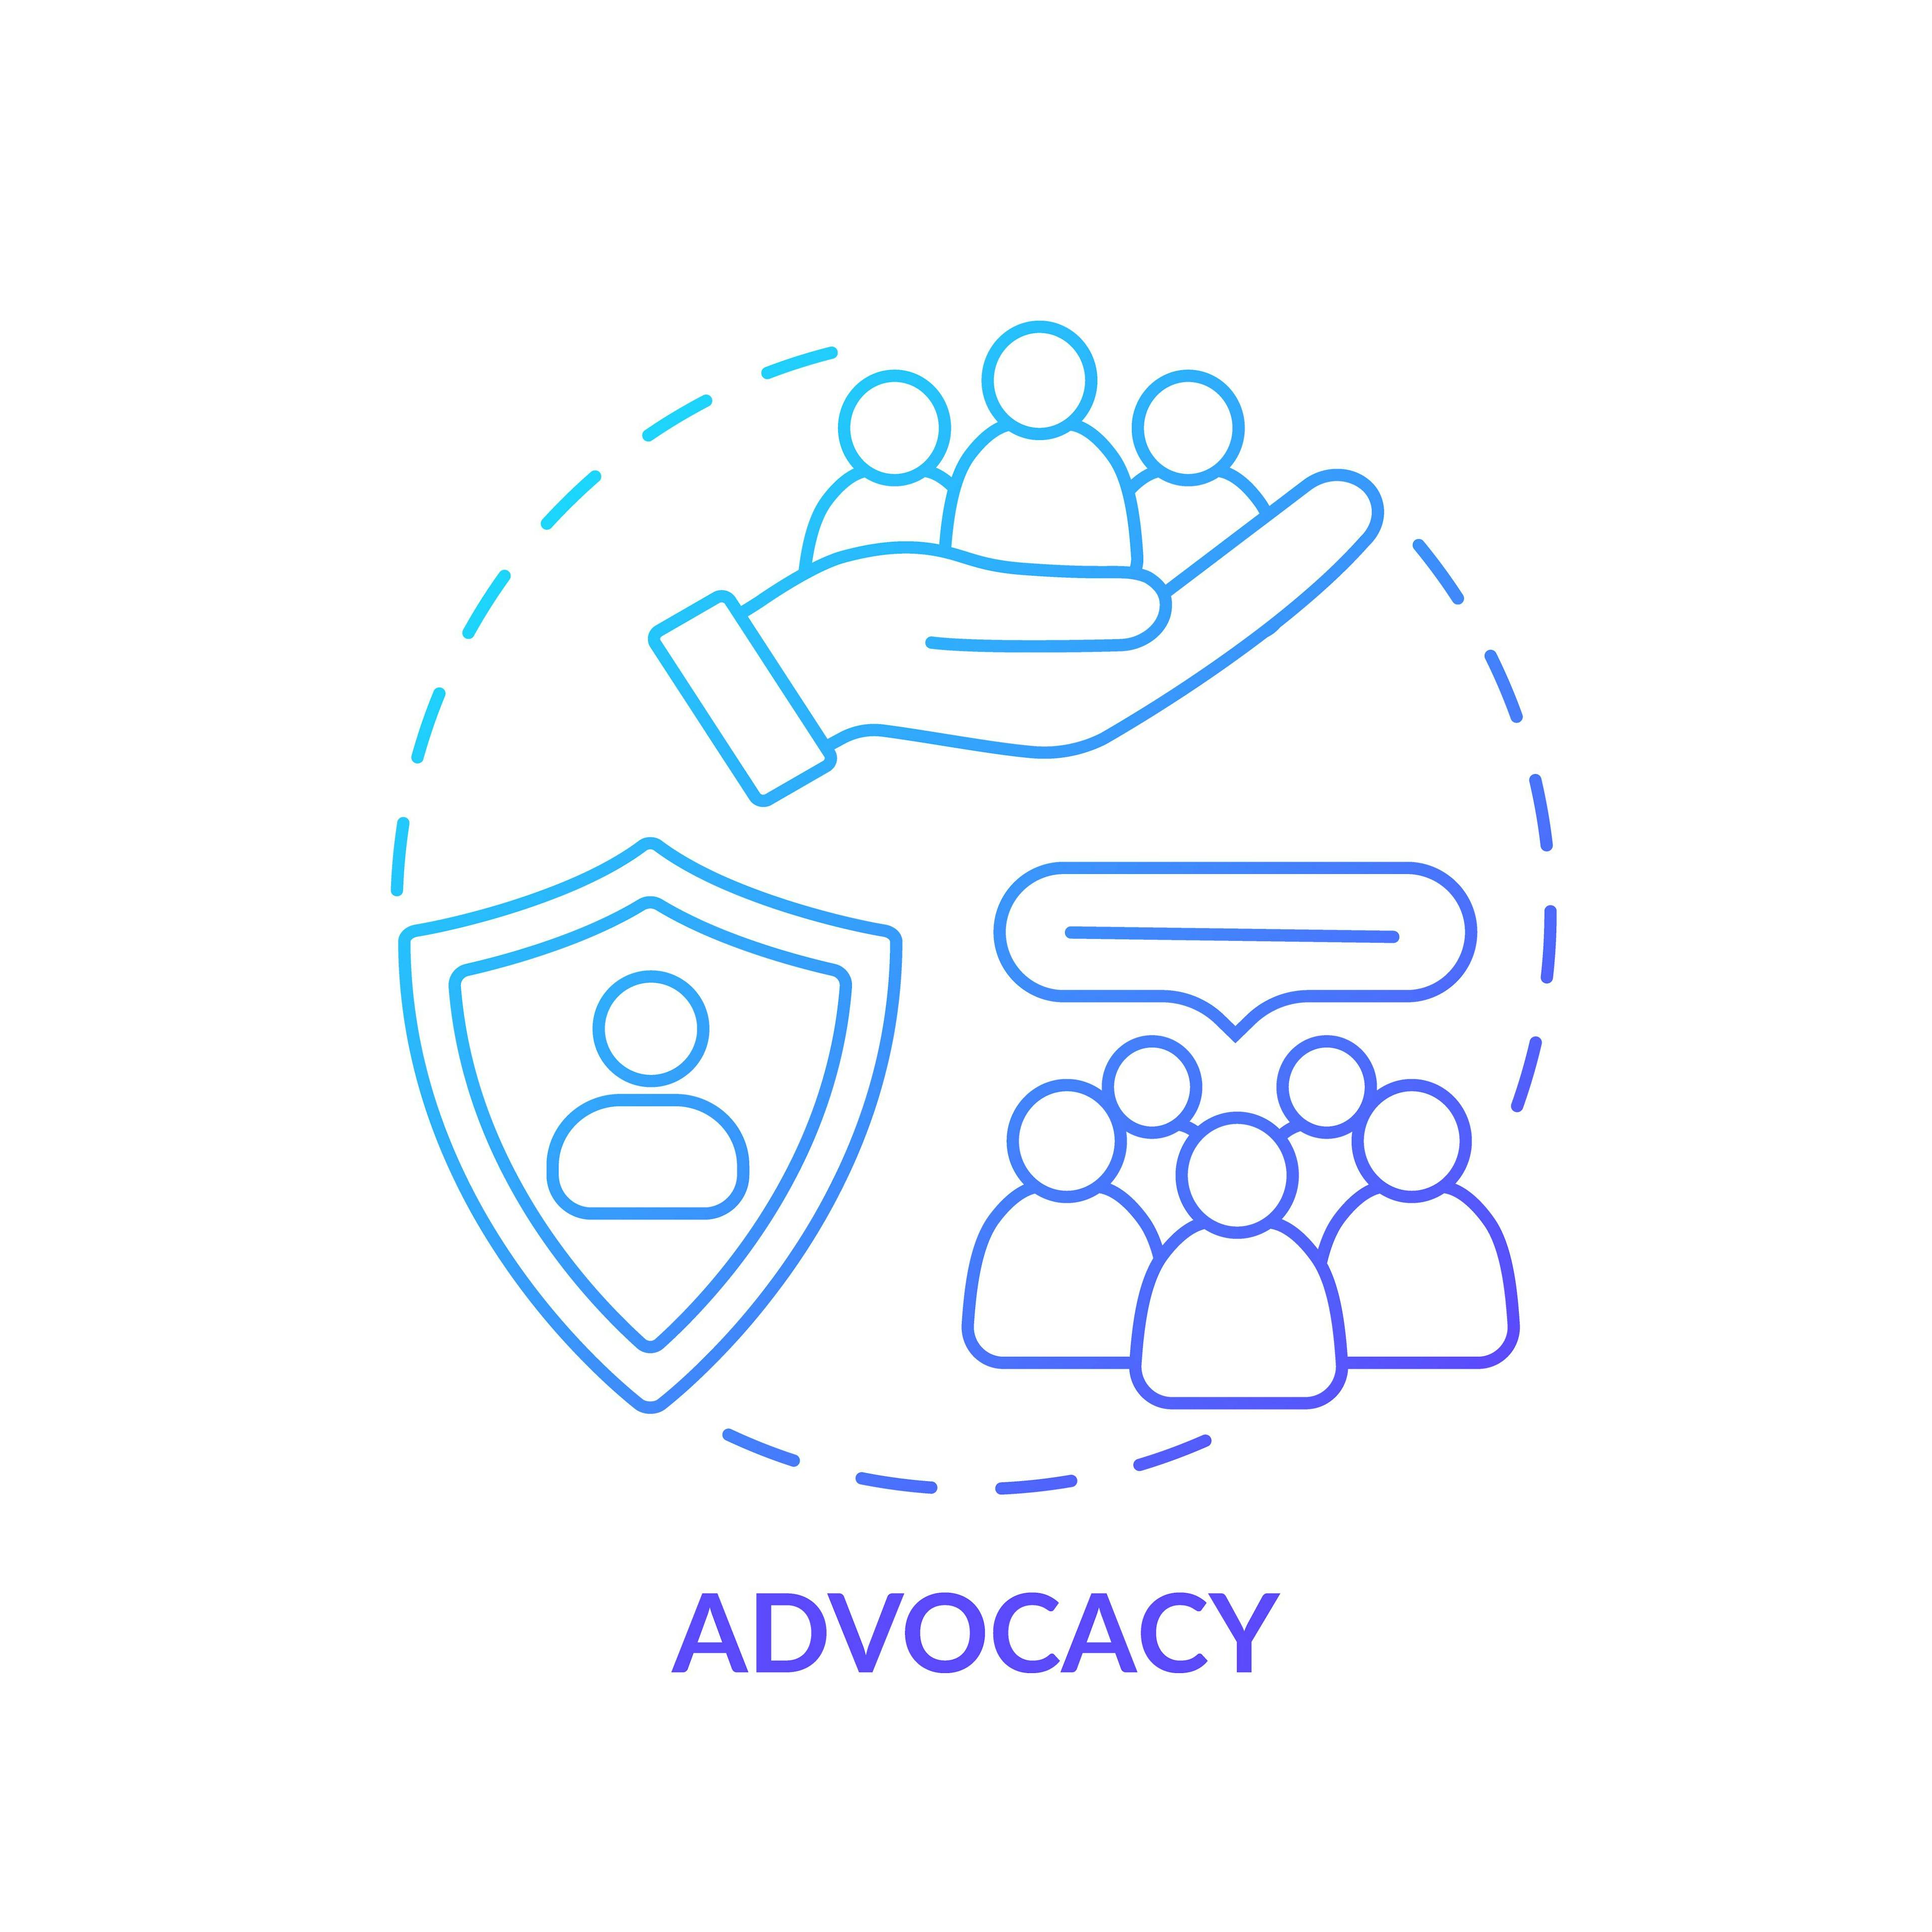 Patient Advocacy: Encouraging Patient’s Access to Care